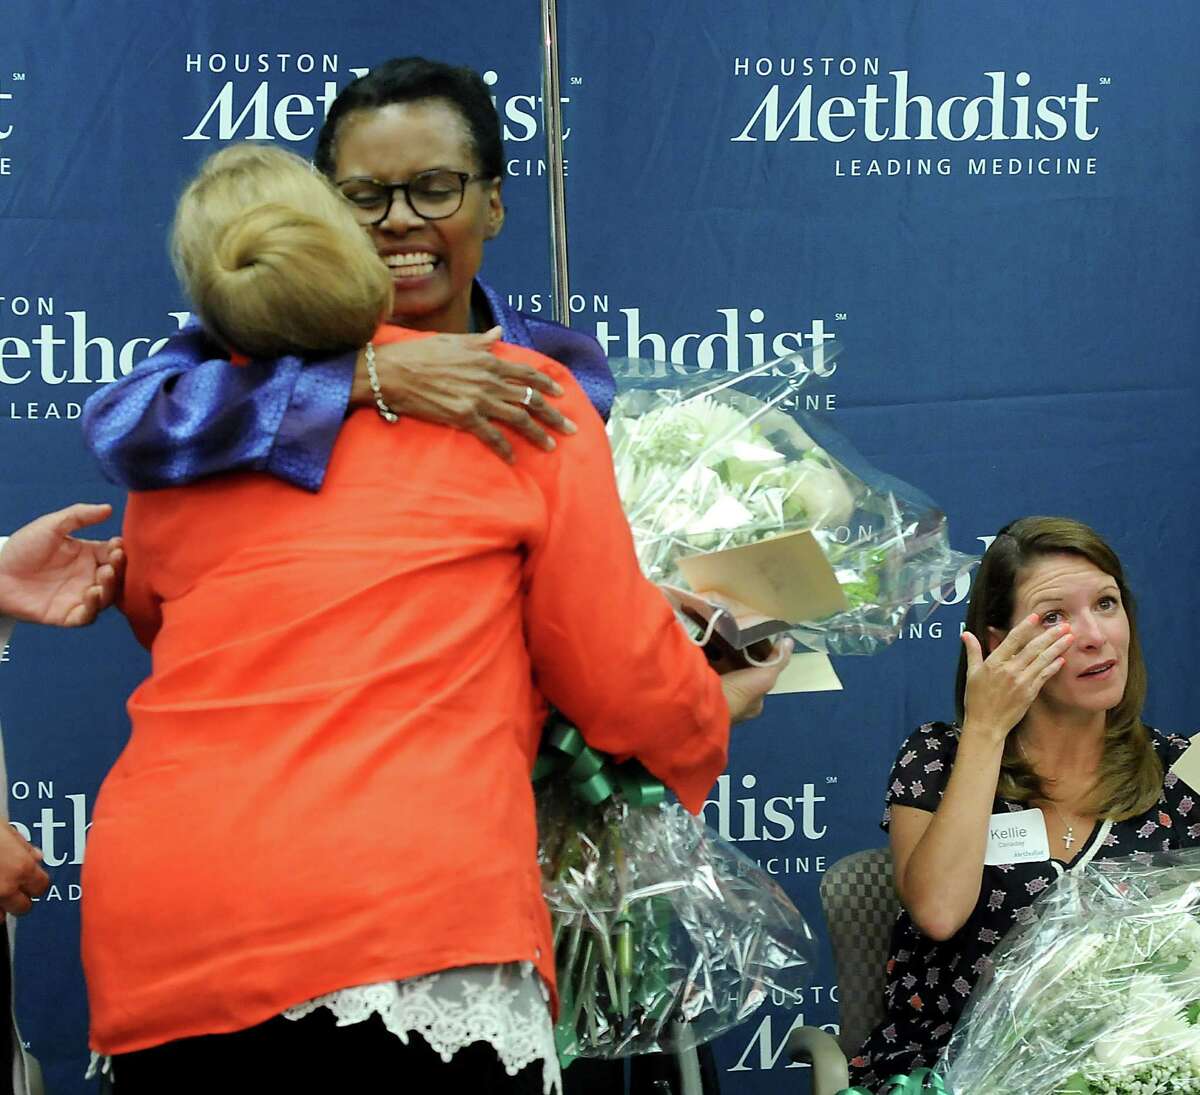 The six-way kidney swap Monday at Houston Methodist Hospital proved to be an emotional moment for donors, including Dana Edson, front left, and Kellie Canaday, right, as well as recipients like Rudyne Walker, center.